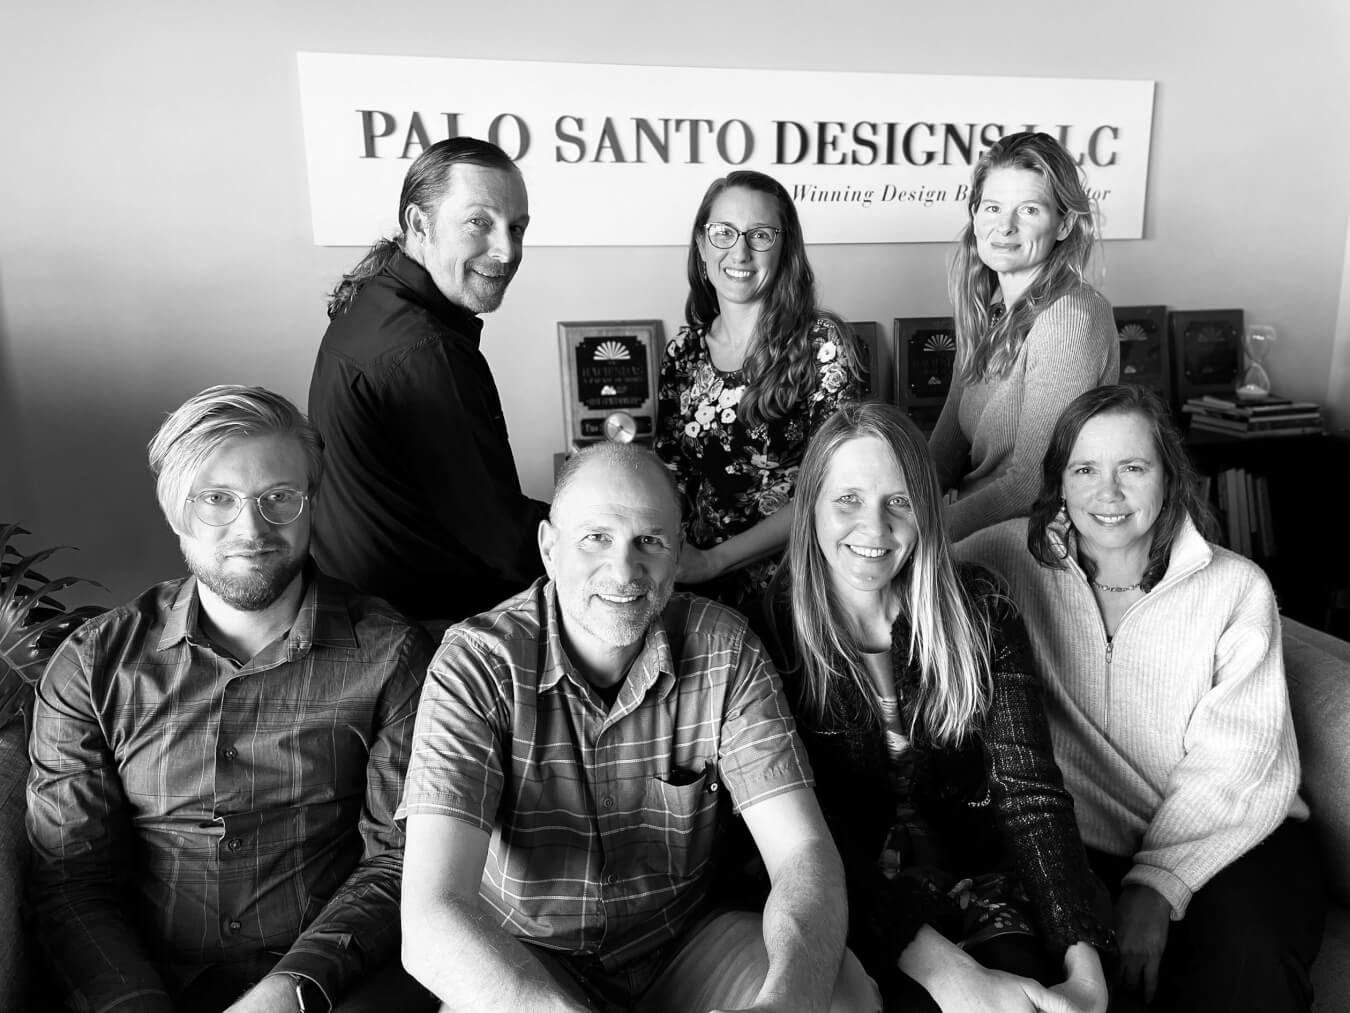 A group of people posing in front of a sign that says Palo Santo Designs, featuring home designers from Santa Fe.